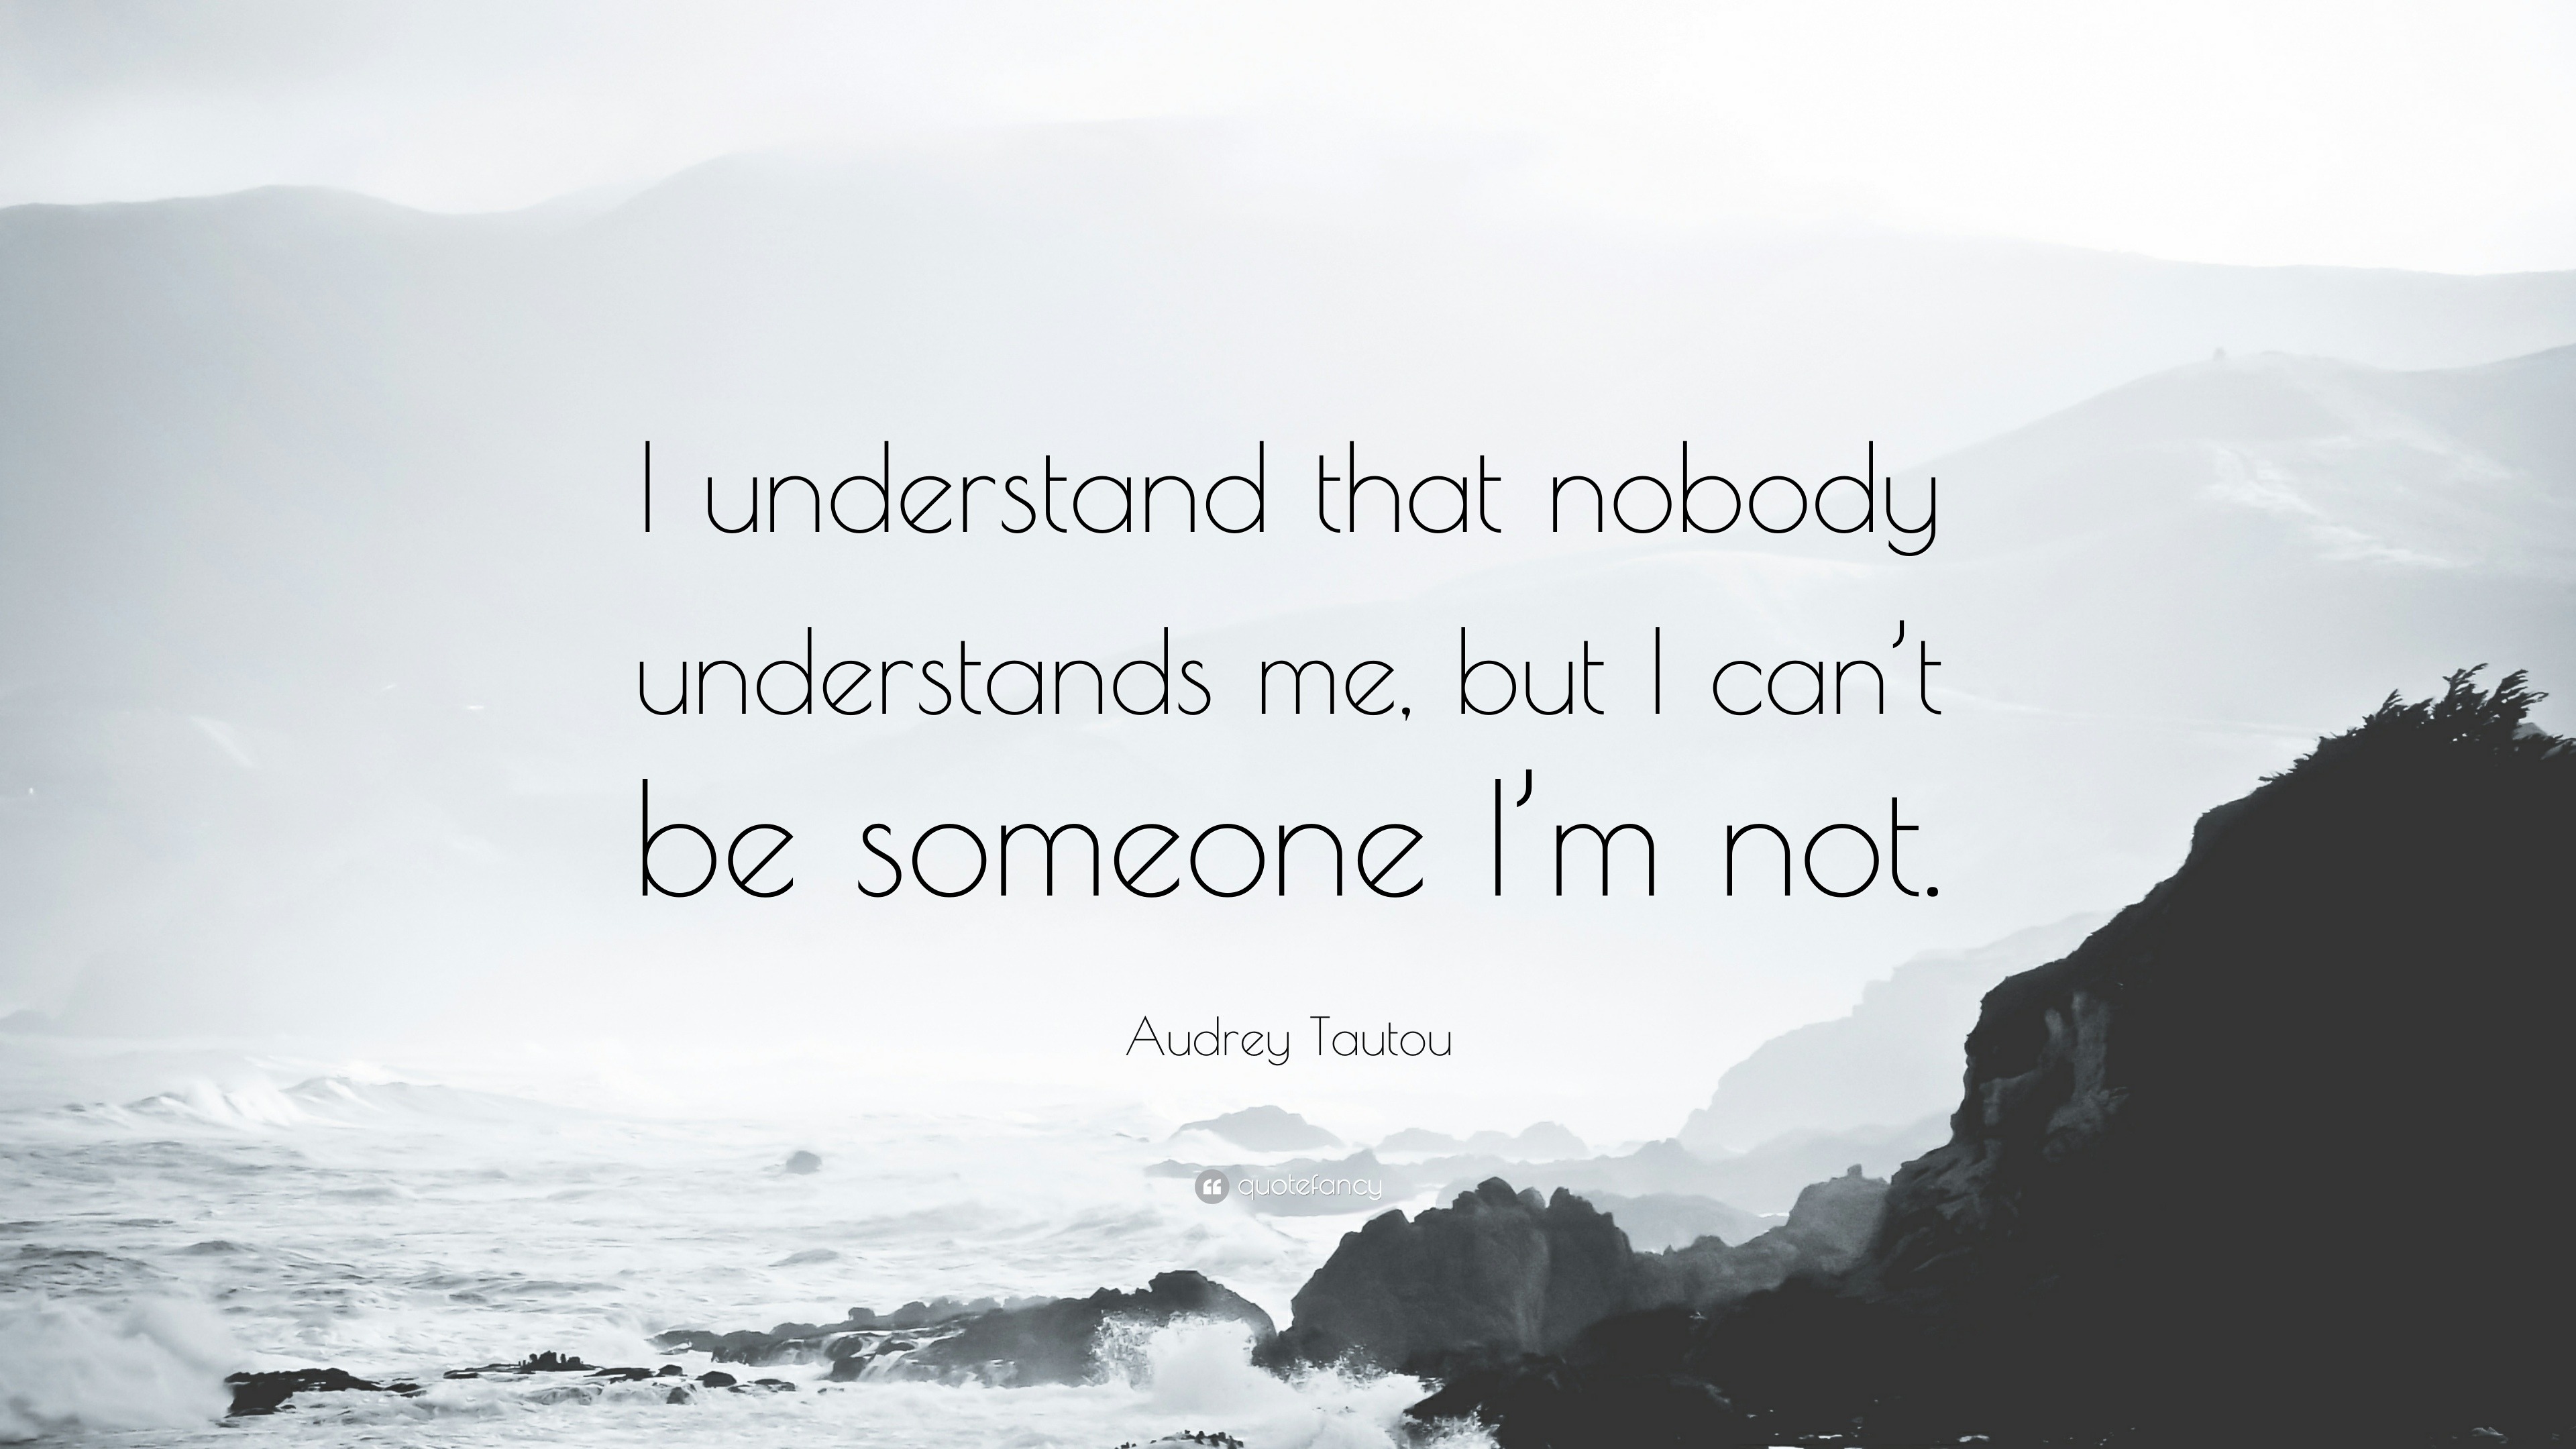 Audrey Tautou Quote: “I Understand That Nobody Understands Me, But I Can't Be Someone I'